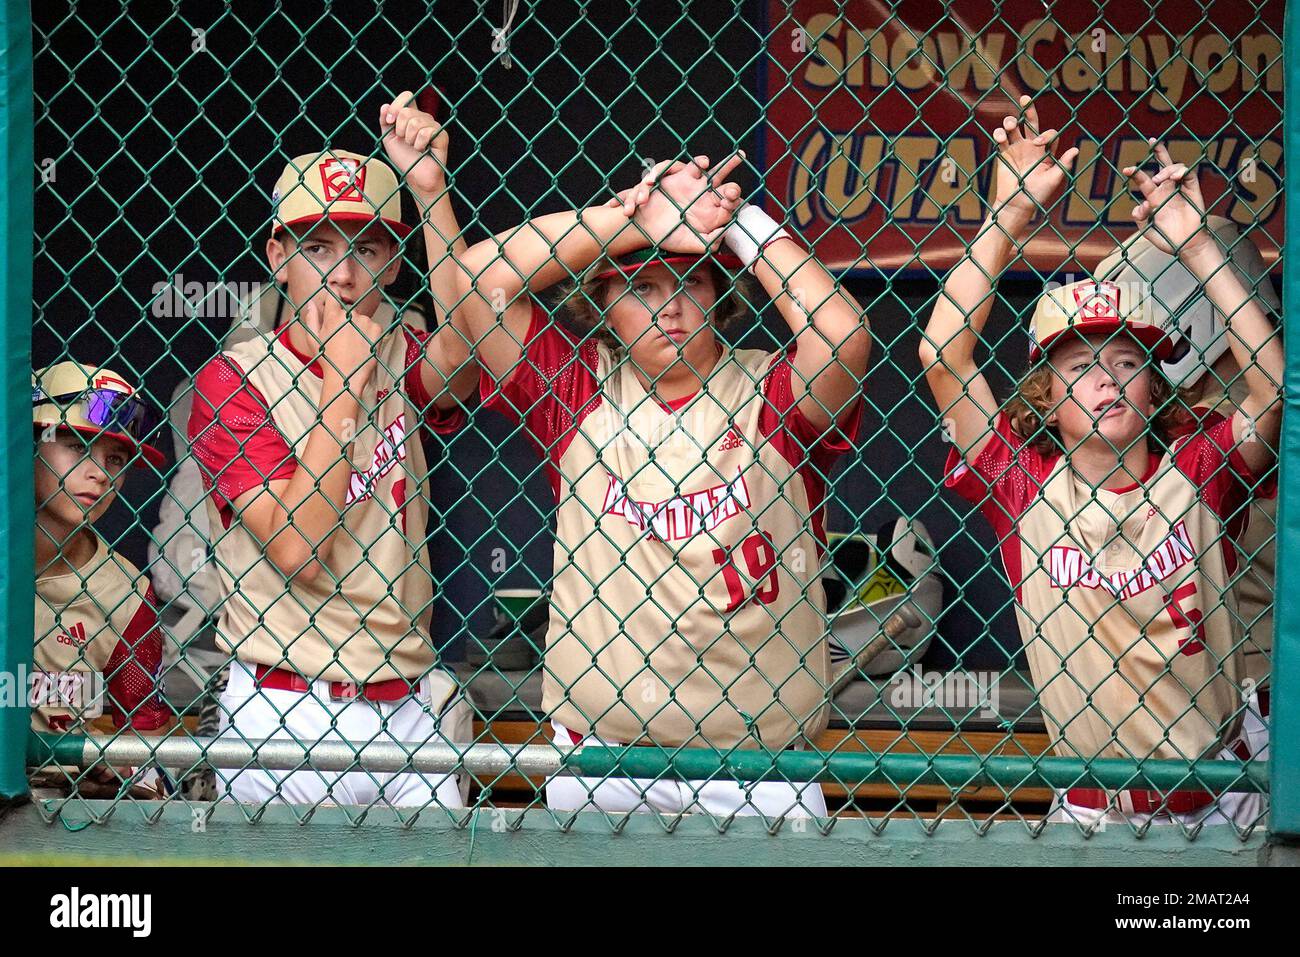 Santa Clara, Utah, players watch from the dugout during the fifth inning of a baseball game against Davenport, Iowa, at the Little League World Series in South Williamsport, Pa., Sunday, Aug